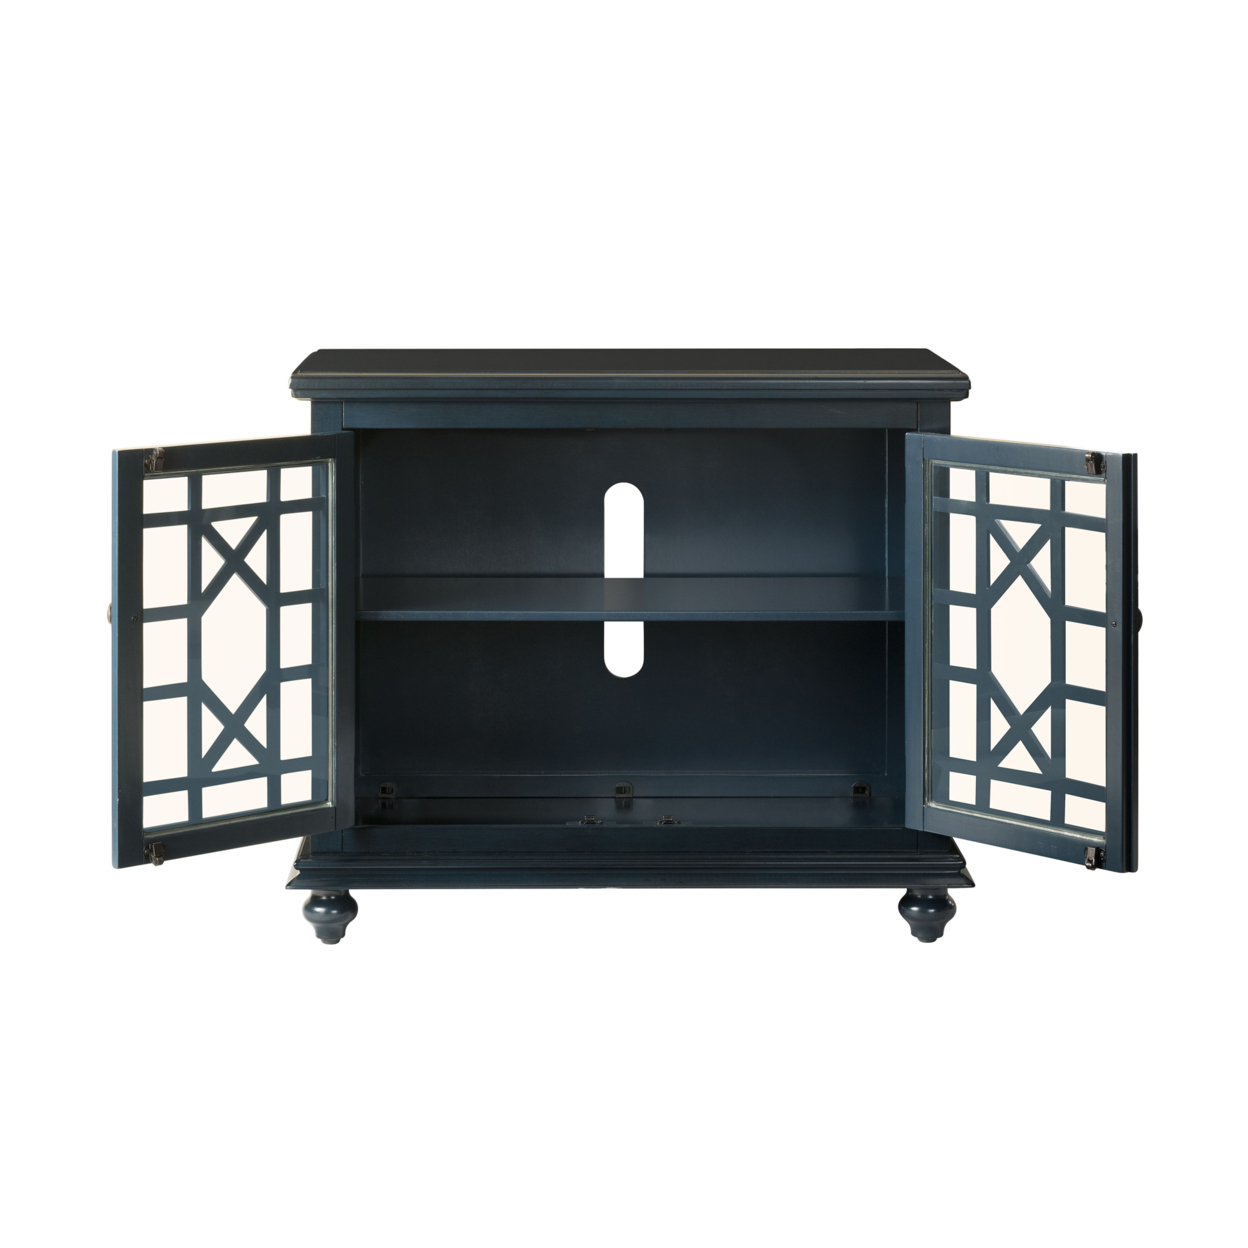 Transitional Wood And Glass TV Stand With Trellis Cabinet Front, Dark Blue- Saltoro Sherpi